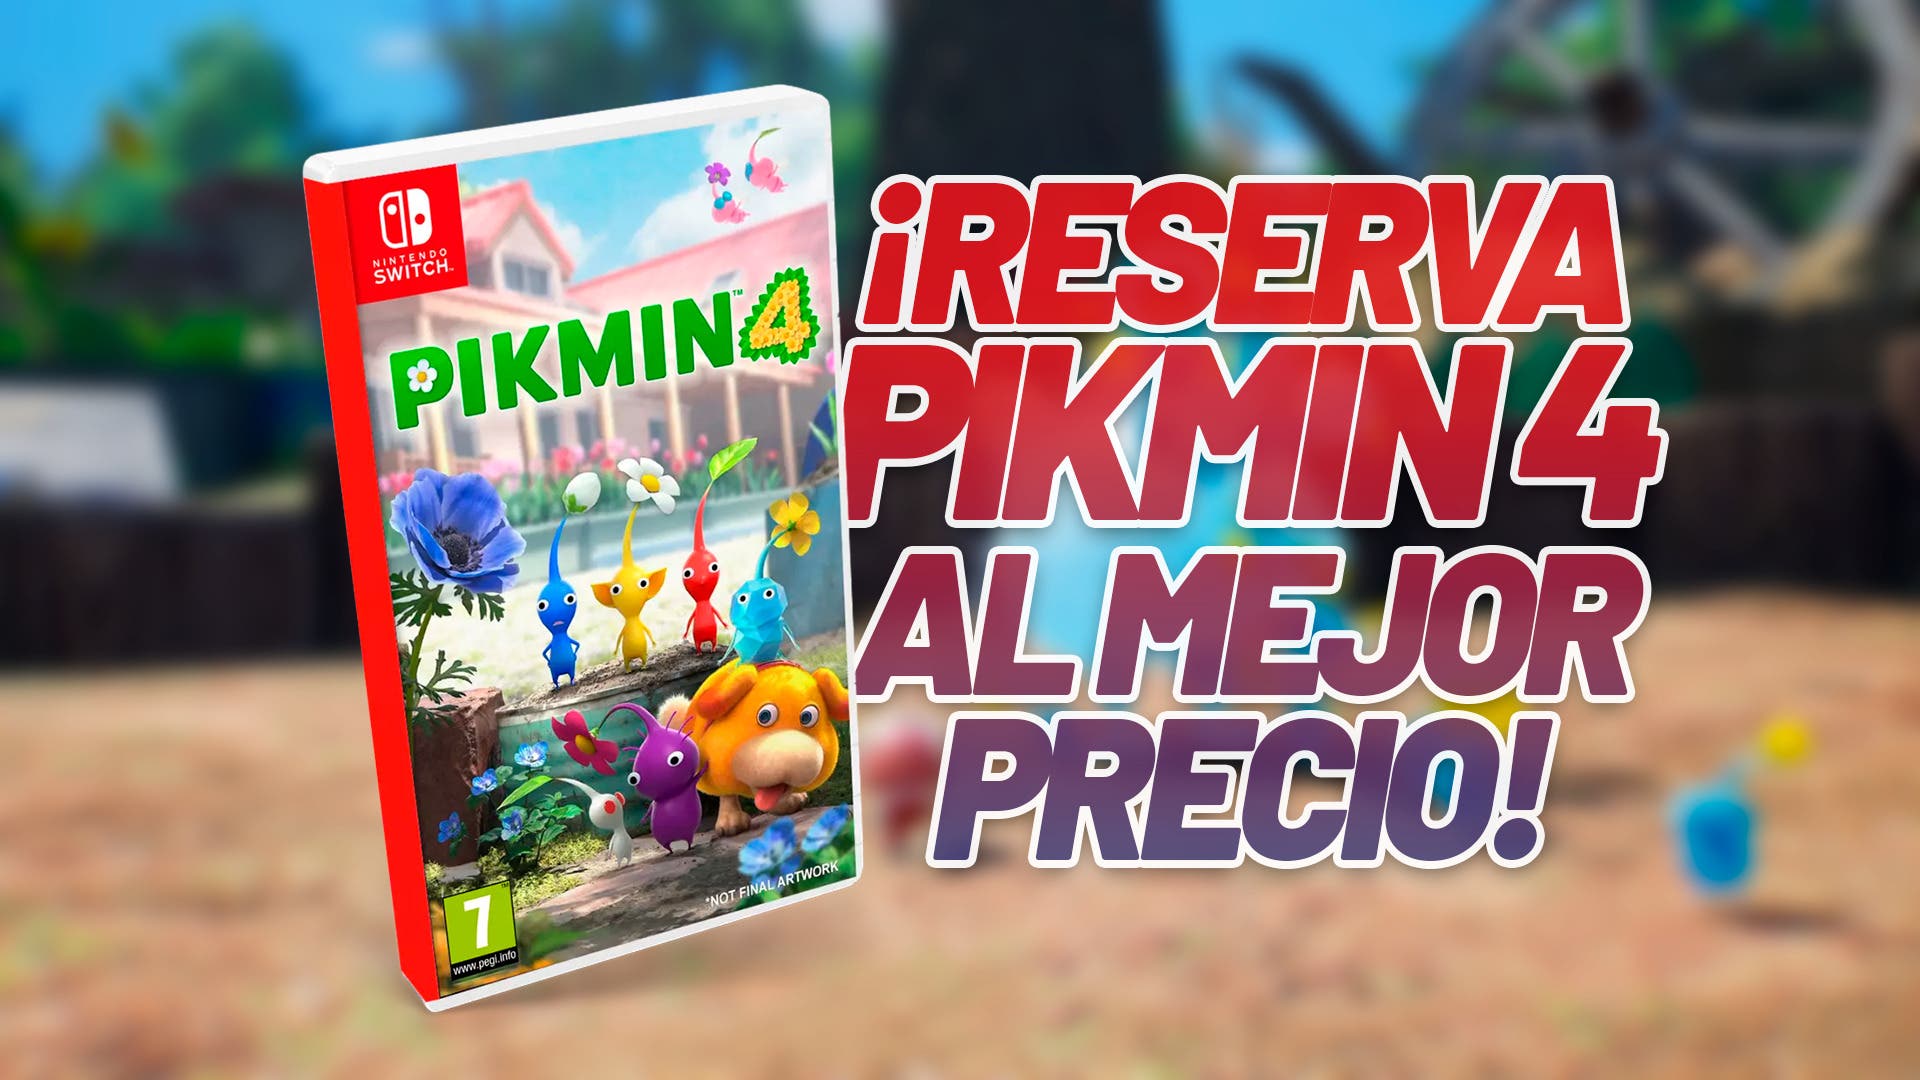 Book Pikmin 4 at the best price with this Amazon offer